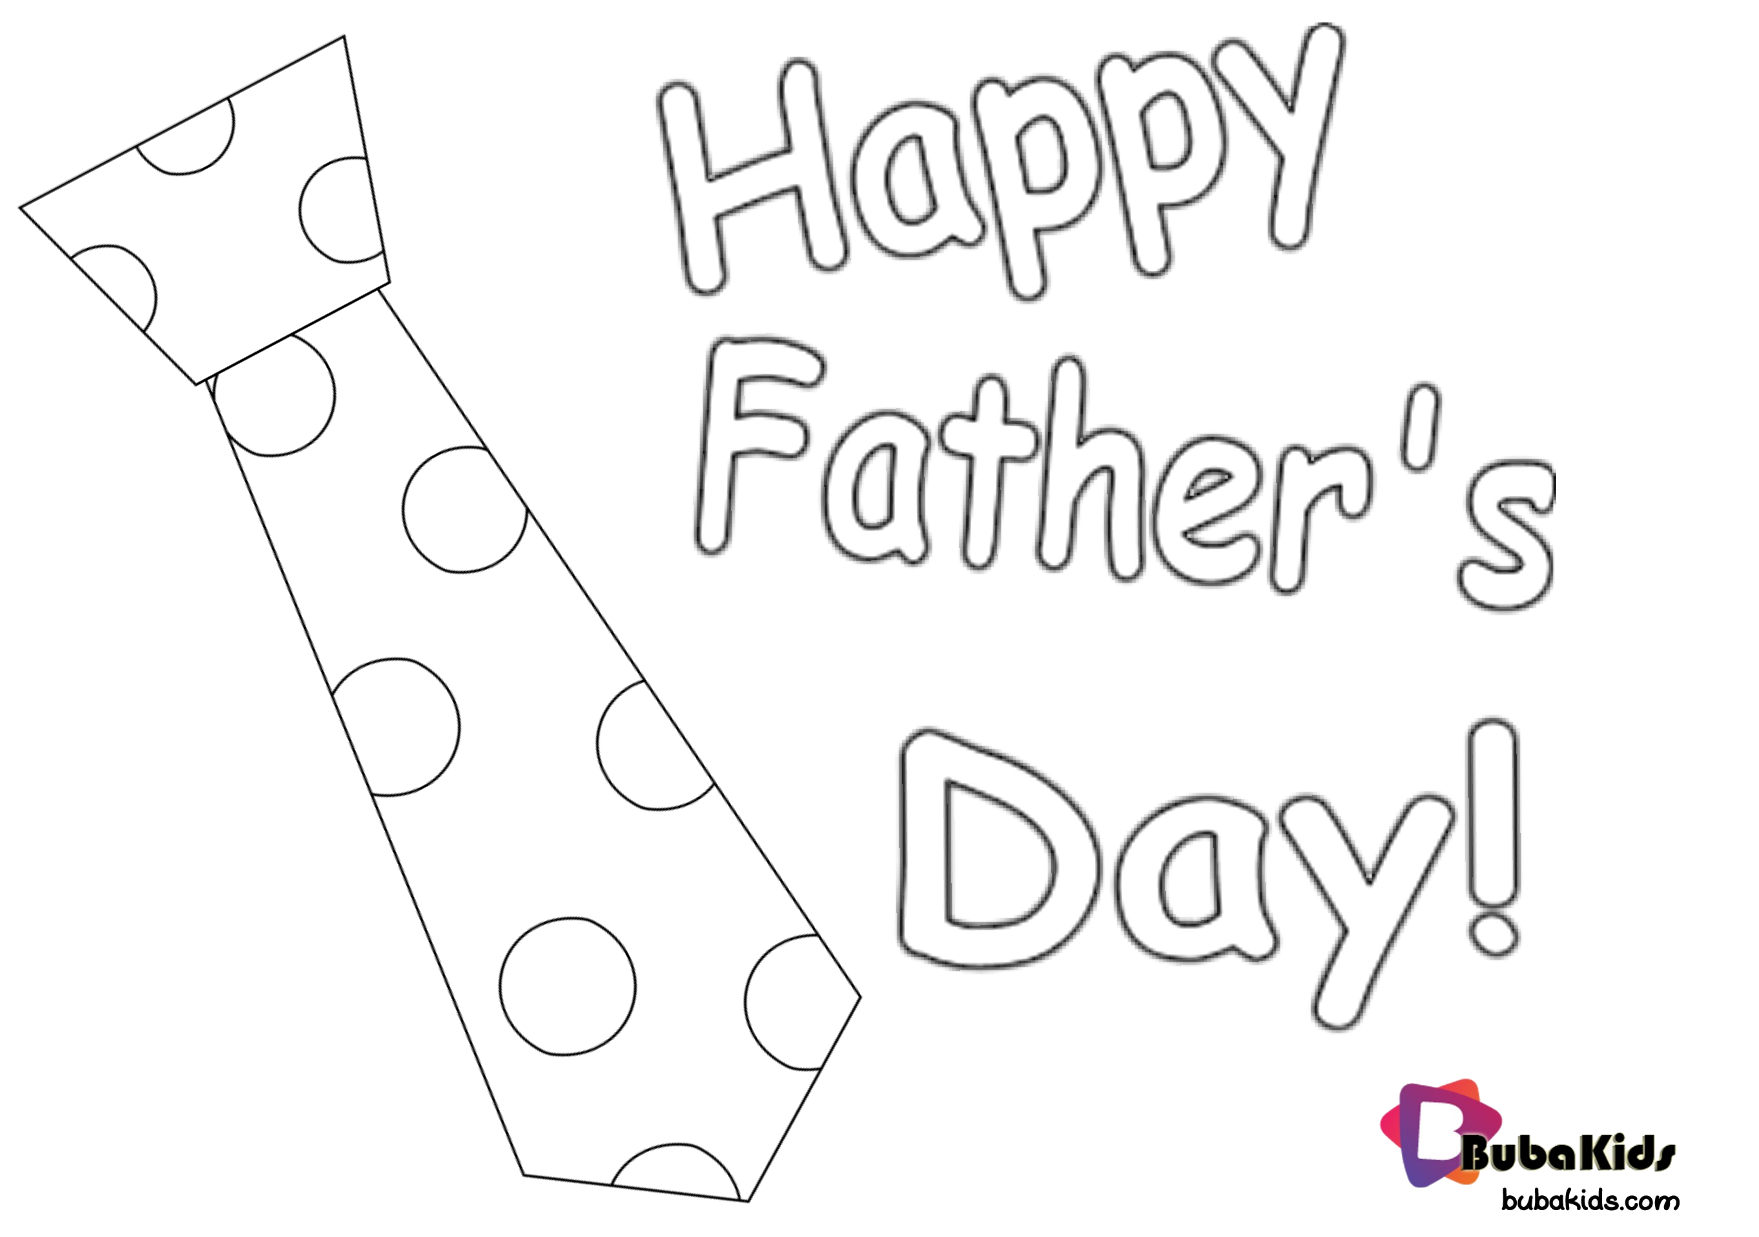 Happy Father’s Day free and printable coloring page. Wallpaper